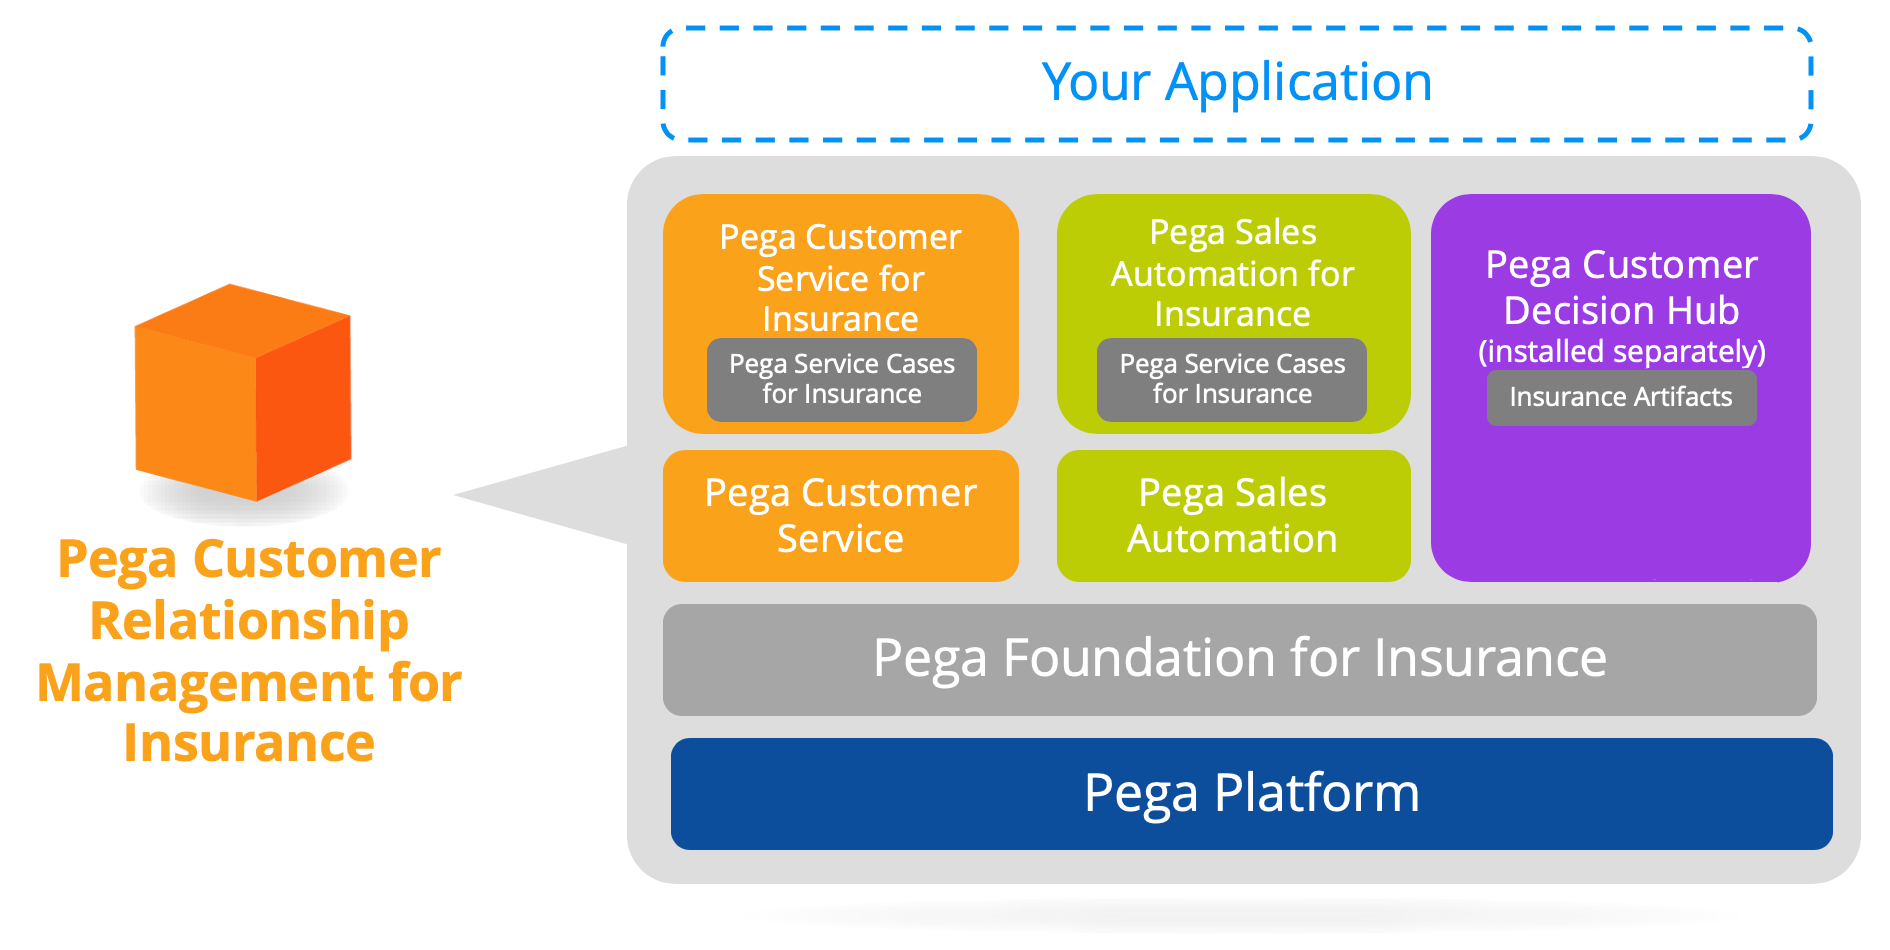 Pega Sales Automation for Insurance application stack